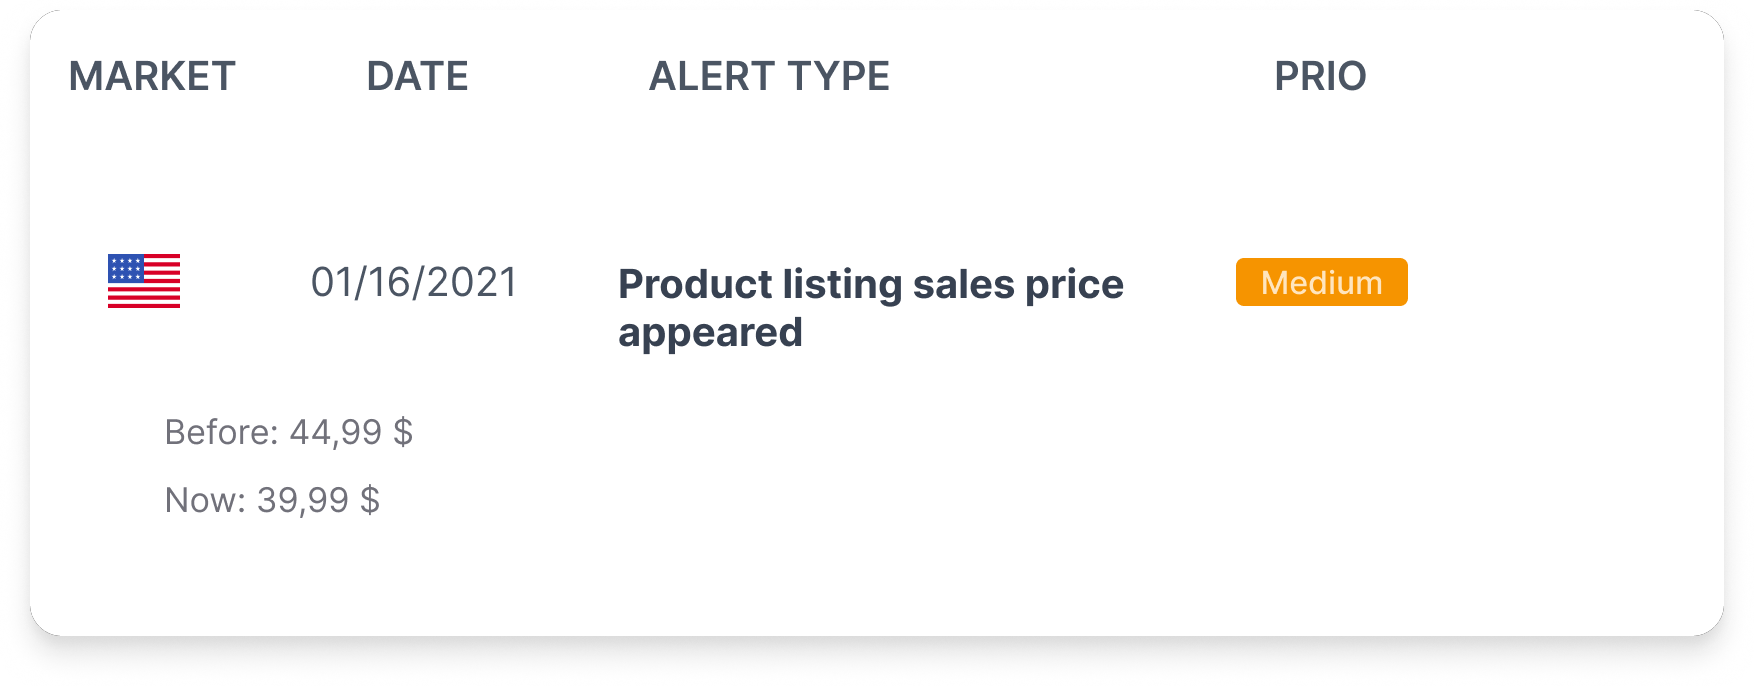 Amazon alert product listing sales price appeared additional information